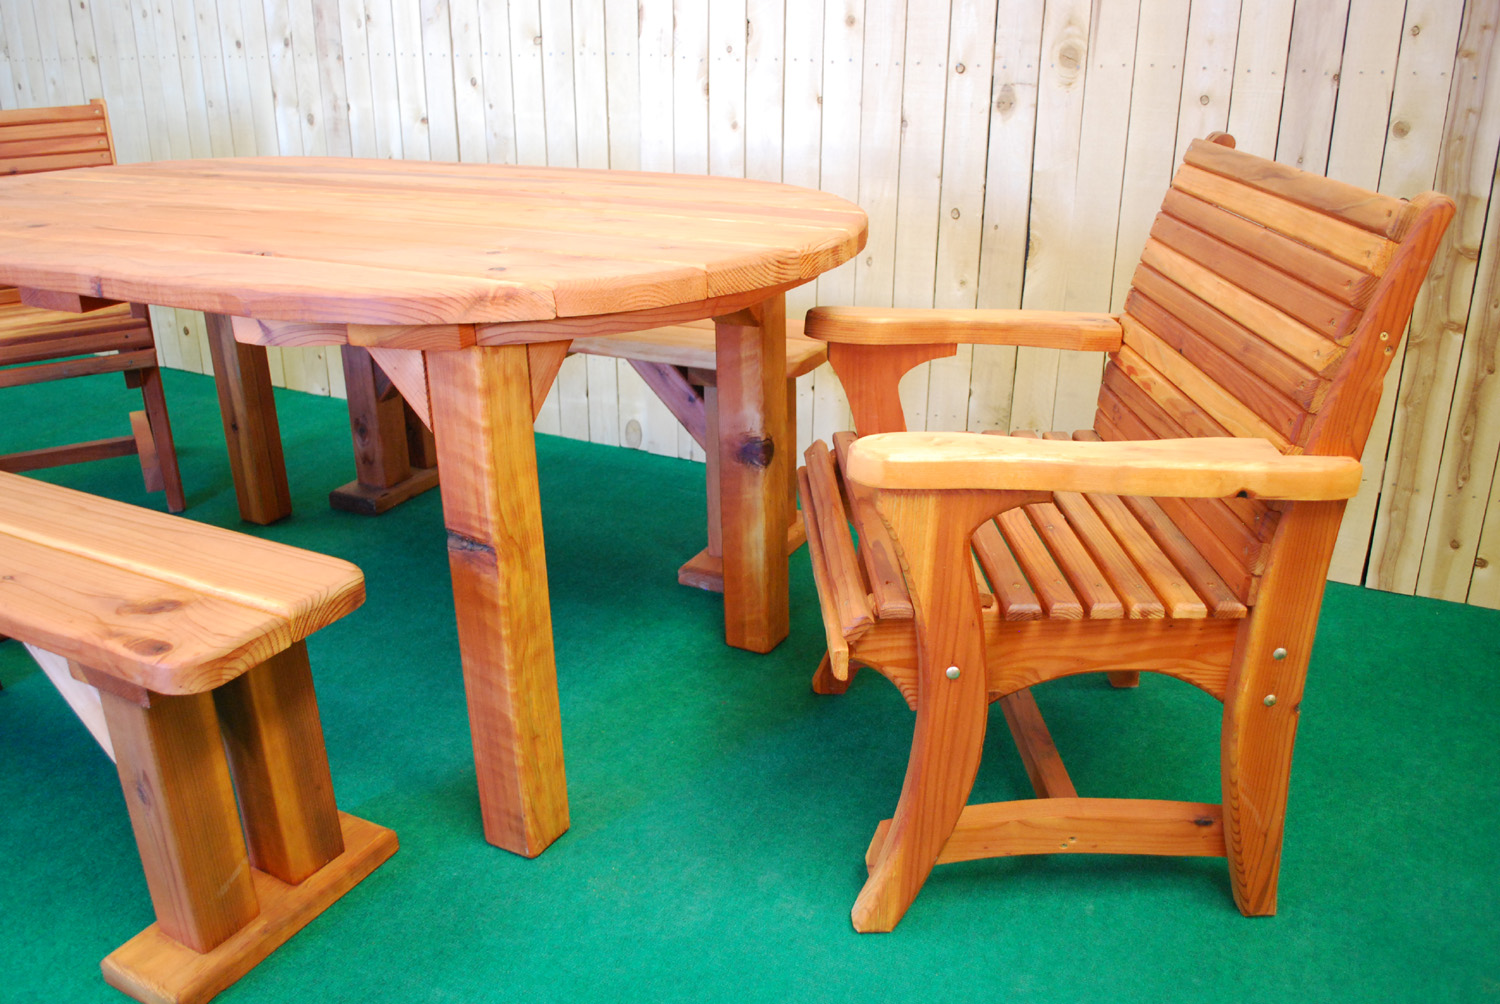 72" redwood oval picnic table shown with optional dining chairs